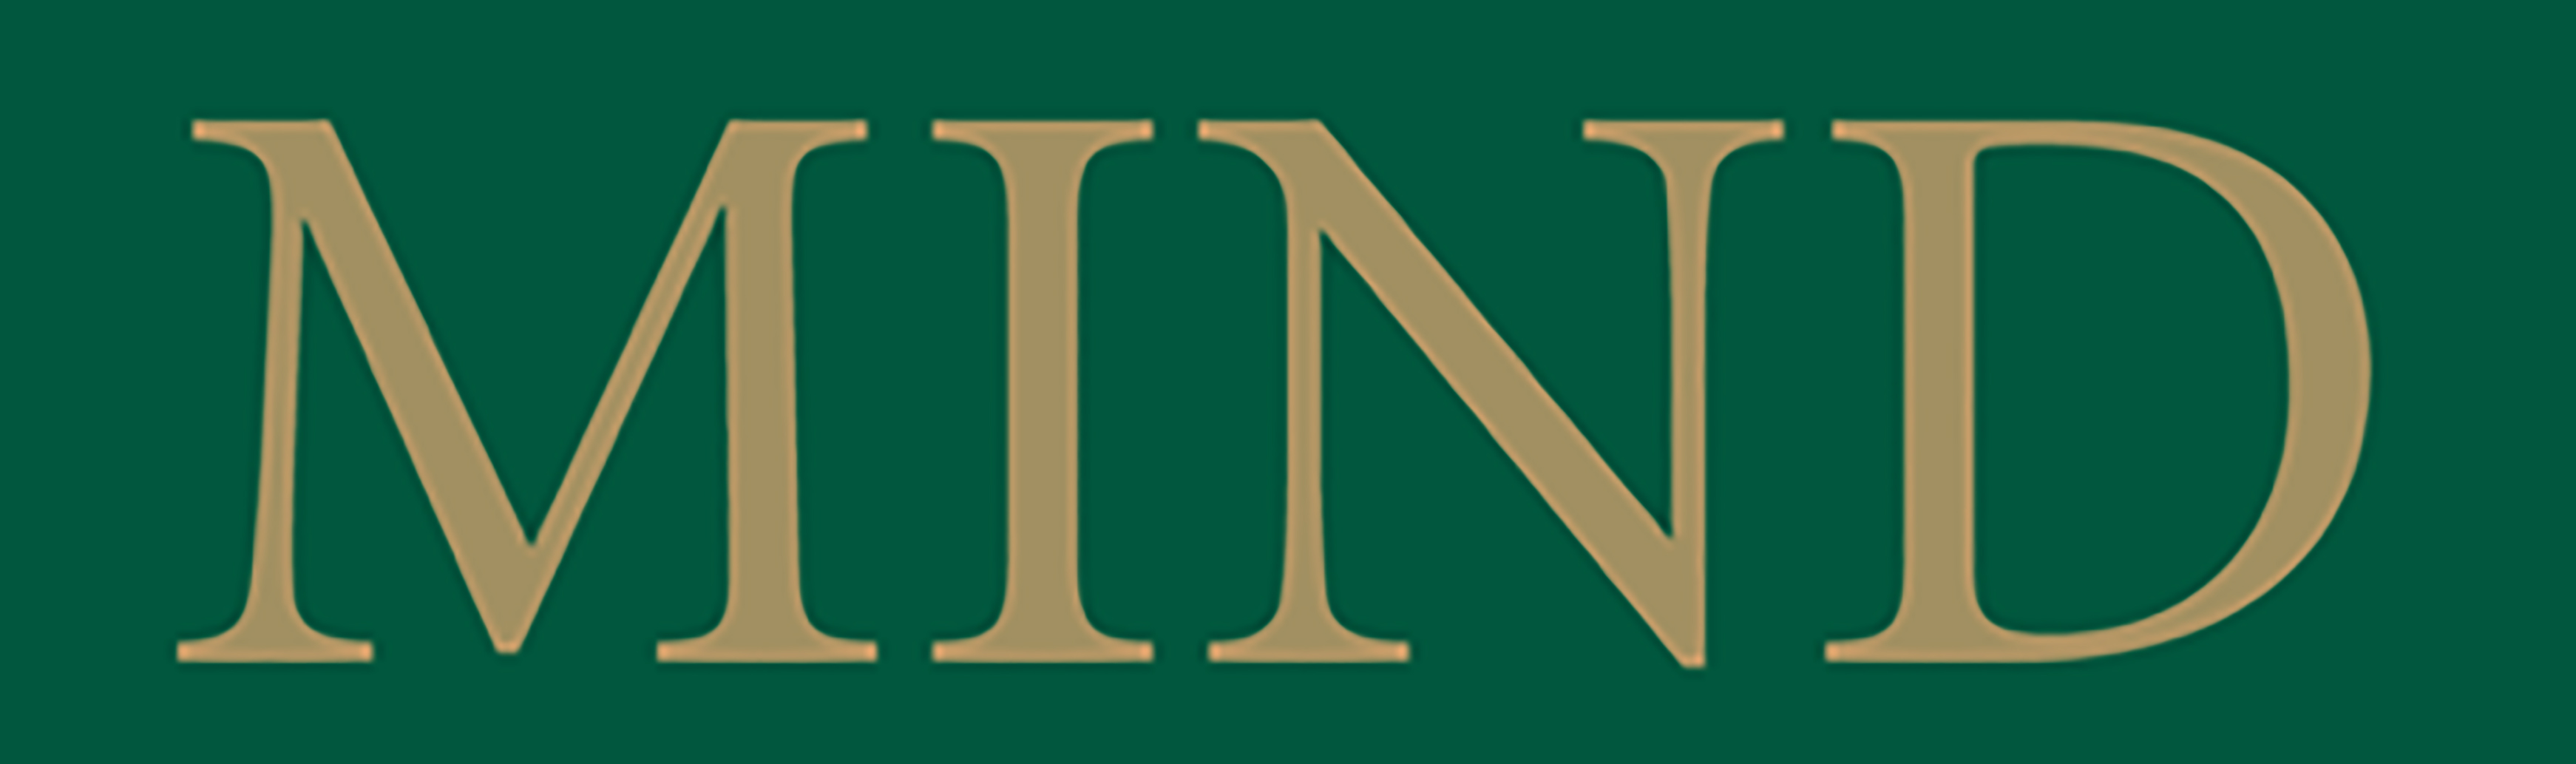 logo: A green background with gold text which reads 